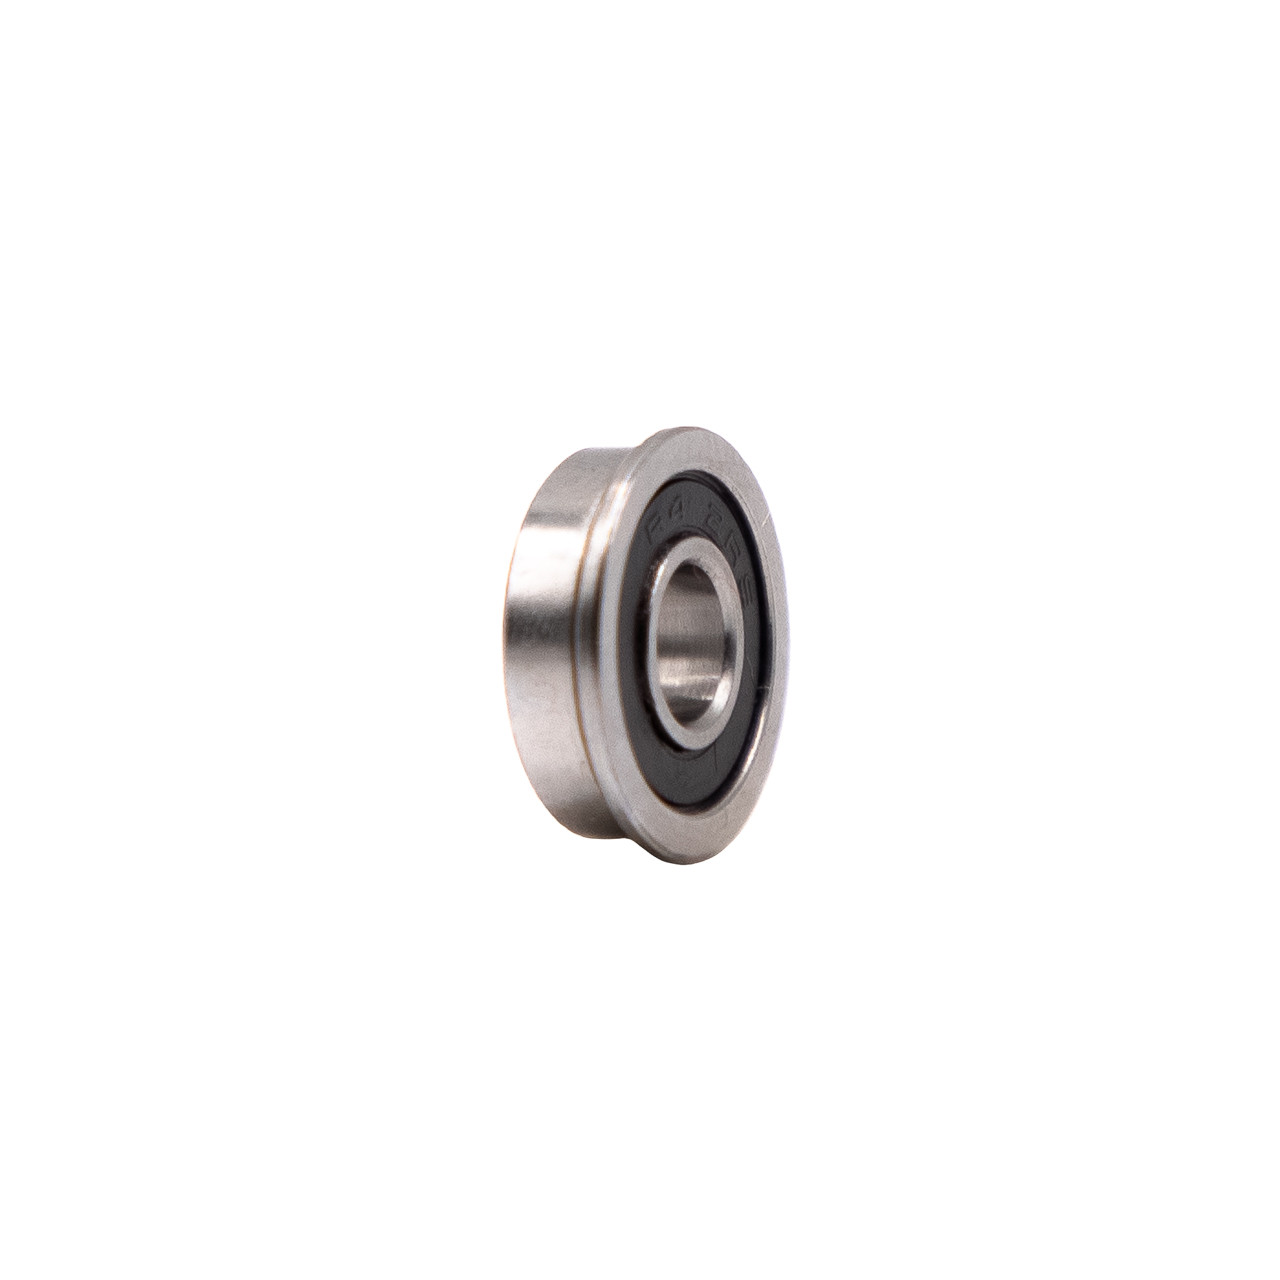 F635-2RS Miniature Flanged Ball Bearing 5x19x6 Side View